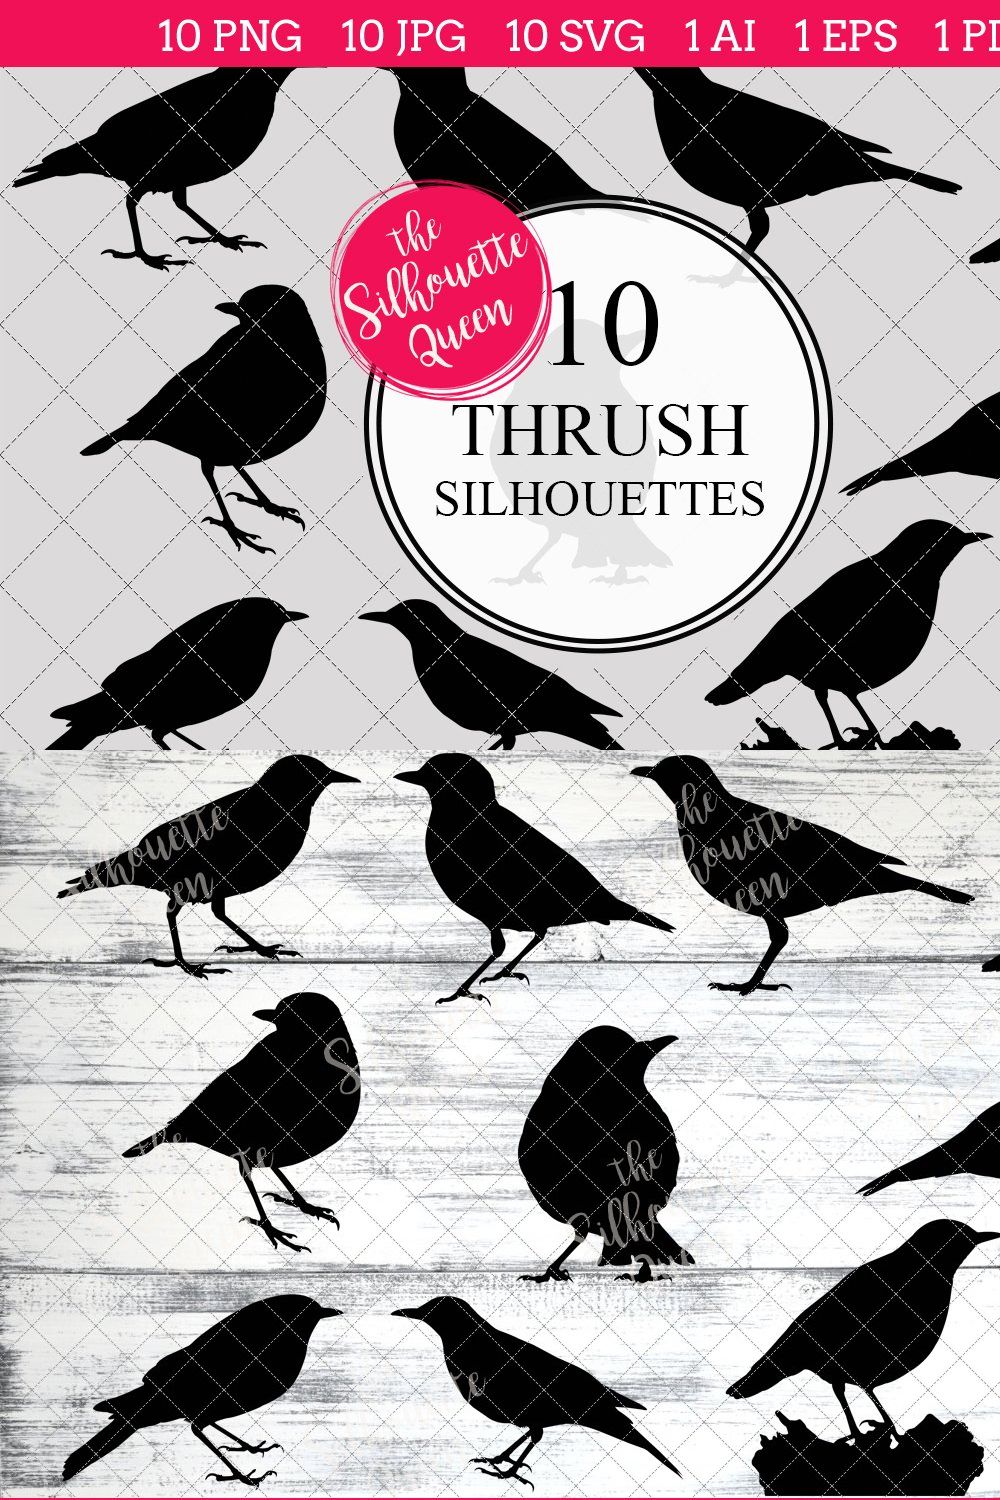 Thrush silhouette vector graphics pinterest preview image.